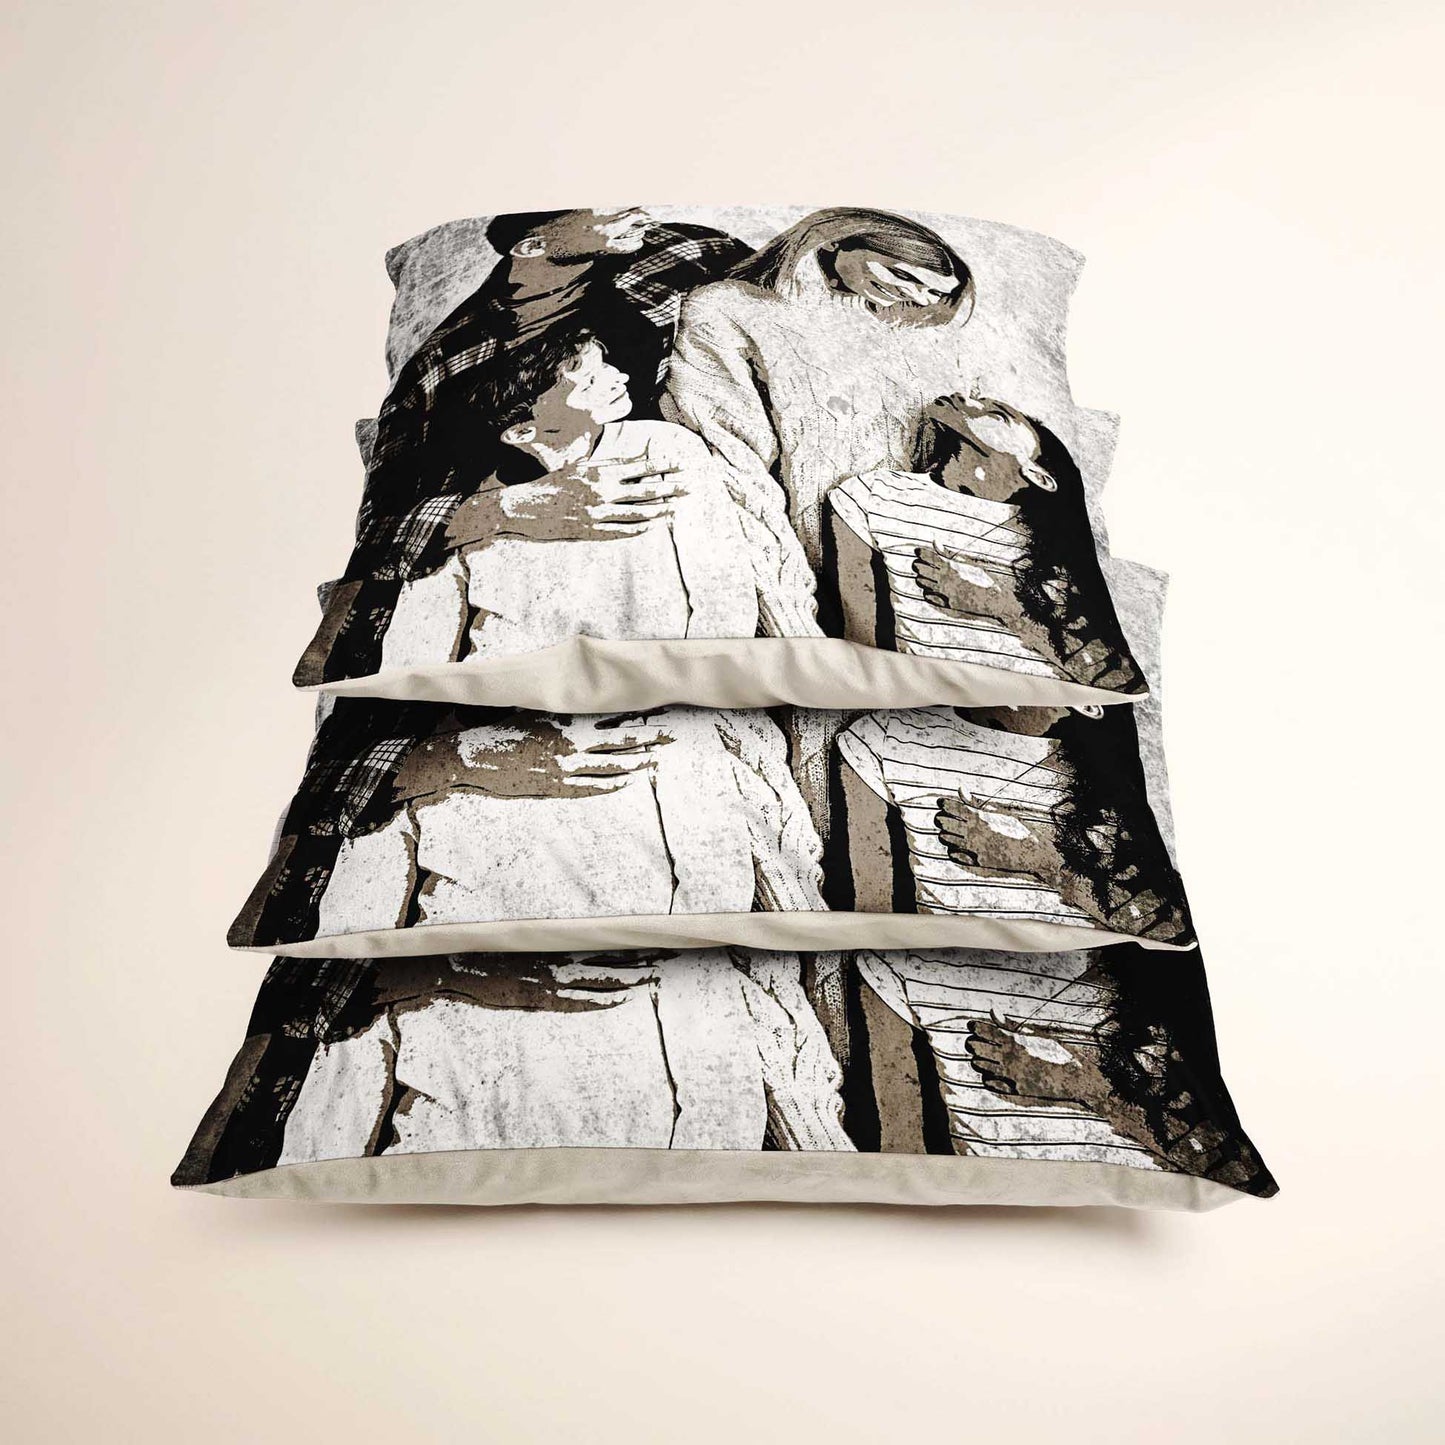 Transform your living space with the Personalised Black & White Street Art Cushion. Made from soft velvet, this cushion features a mesmerizing graffiti print that brings the energy of urban art into your home, elegant and clean design